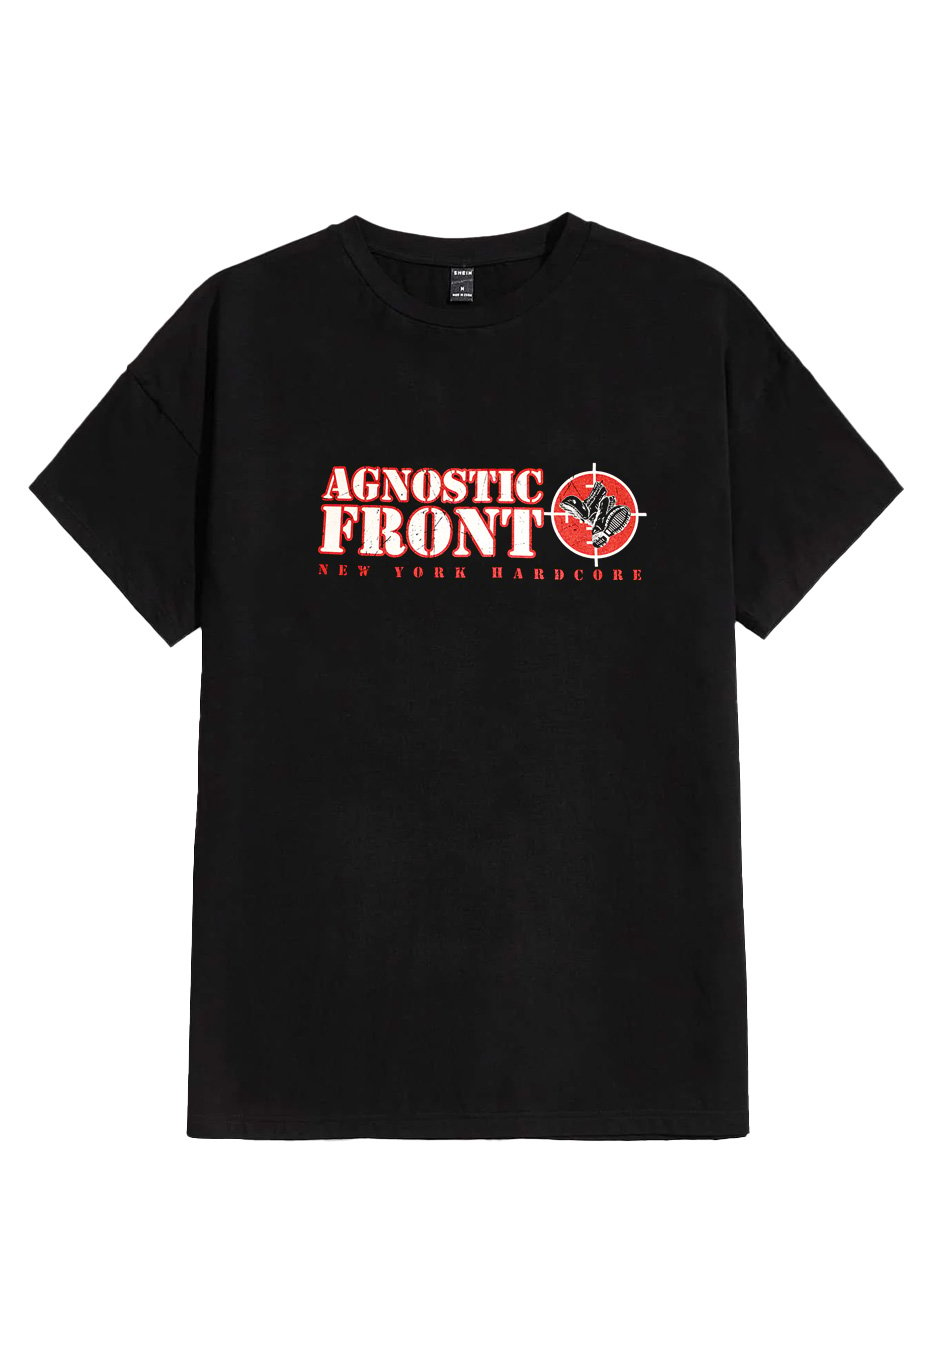 Agnostic Front - We Hate Society - T-Shirt